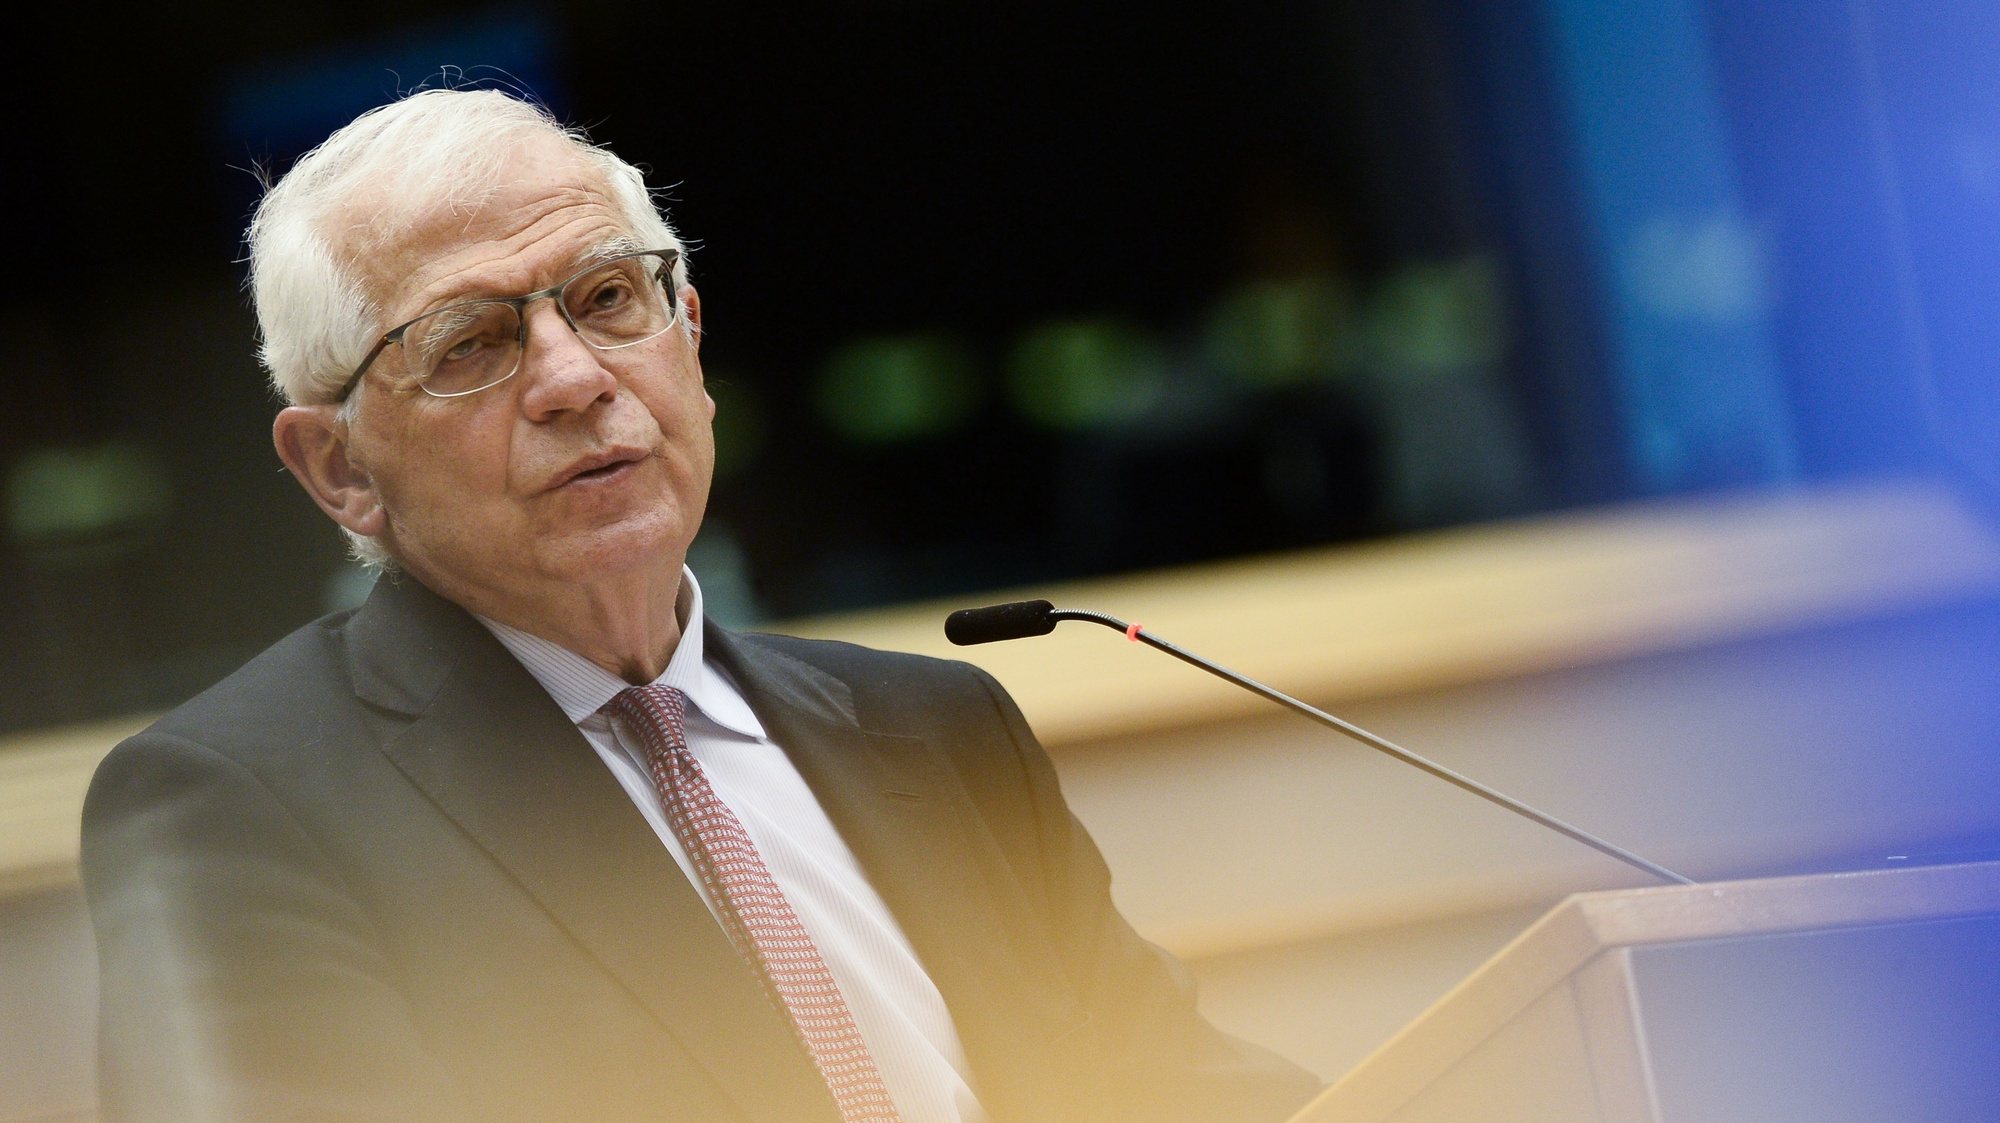 epa09165403 European High Representative of the Union for Foreign Affairs, Josep Borrell addresses the European Parliament in Brussels, Belgium 28 April 2021. The European Parliament debates a resolution on recent events in Russia among others.  EPA/JOHANNA GERON / POOL